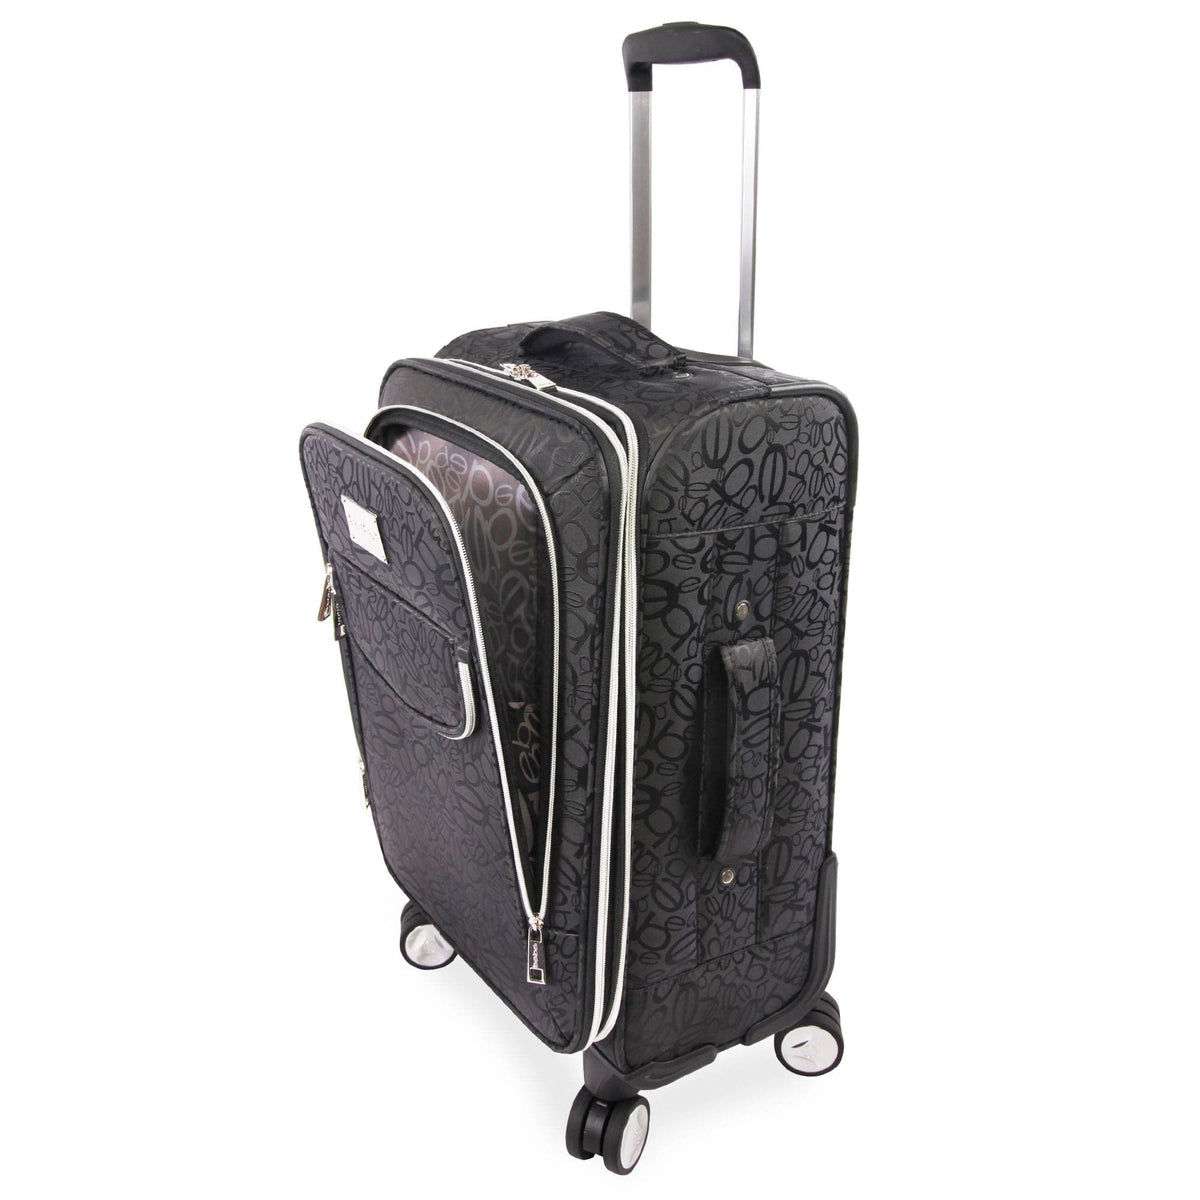 BEBE Carissa 21" Expandable Spinner Carry-On Luggage